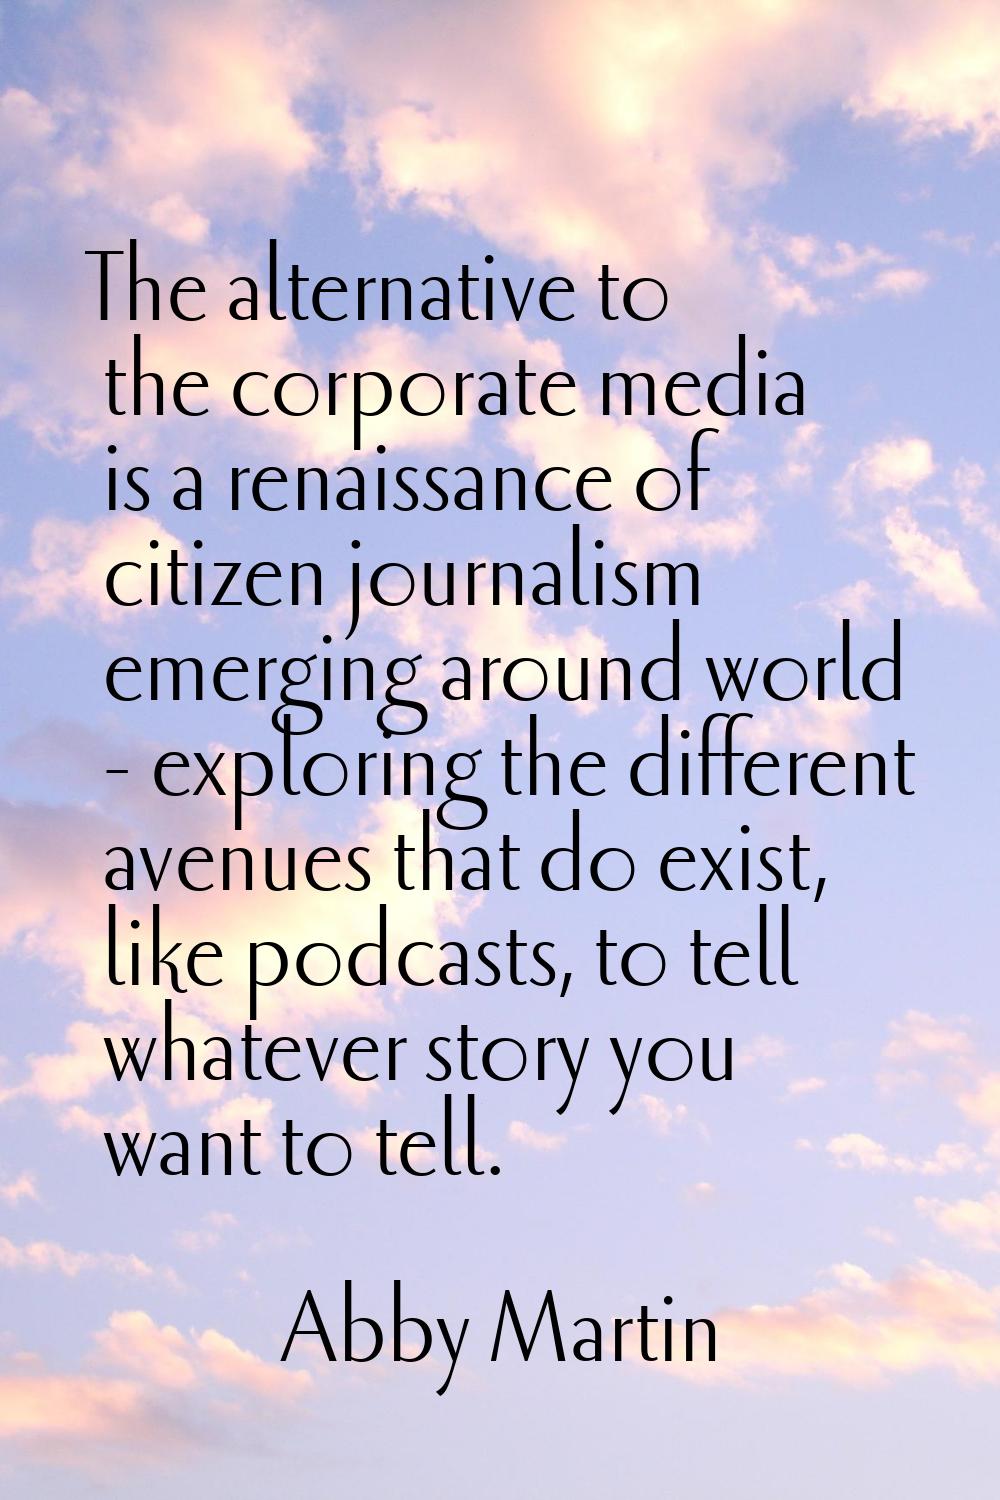 The alternative to the corporate media is a renaissance of citizen journalism emerging around world